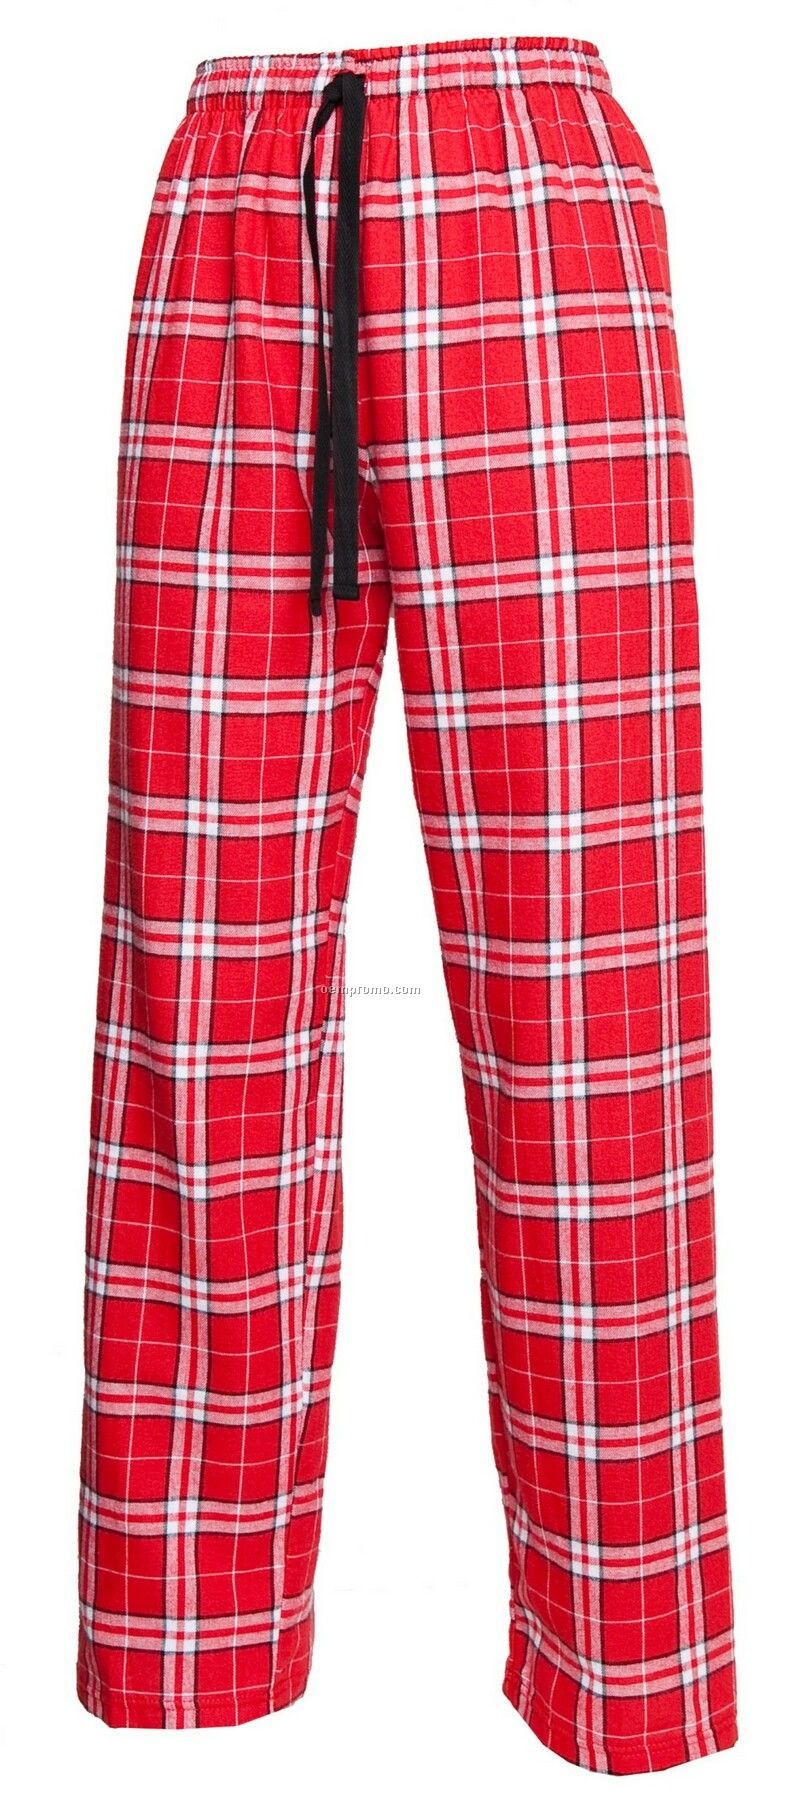 Adult Team Pride Flannel Pant In Red & White Plaid